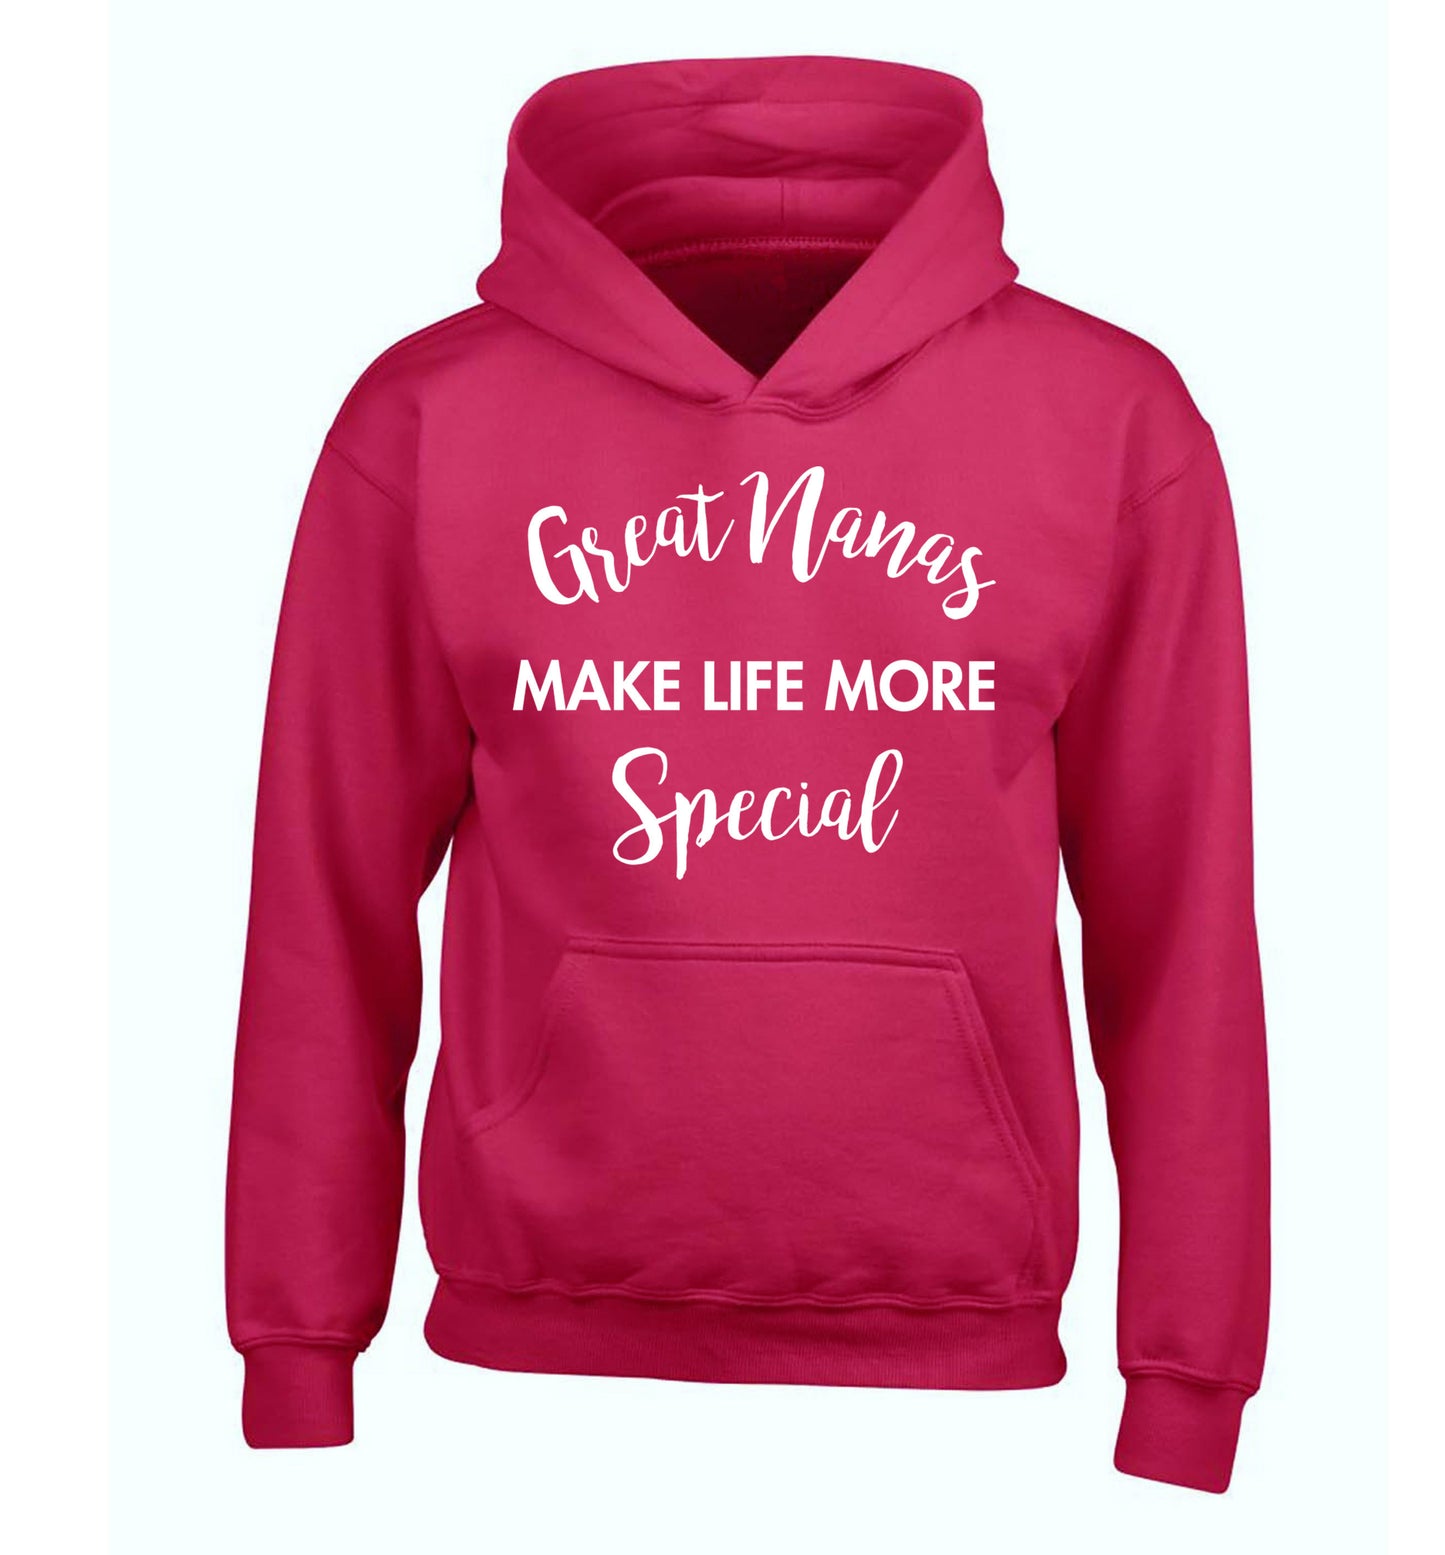 Great nanas make life more special children's pink hoodie 12-14 Years